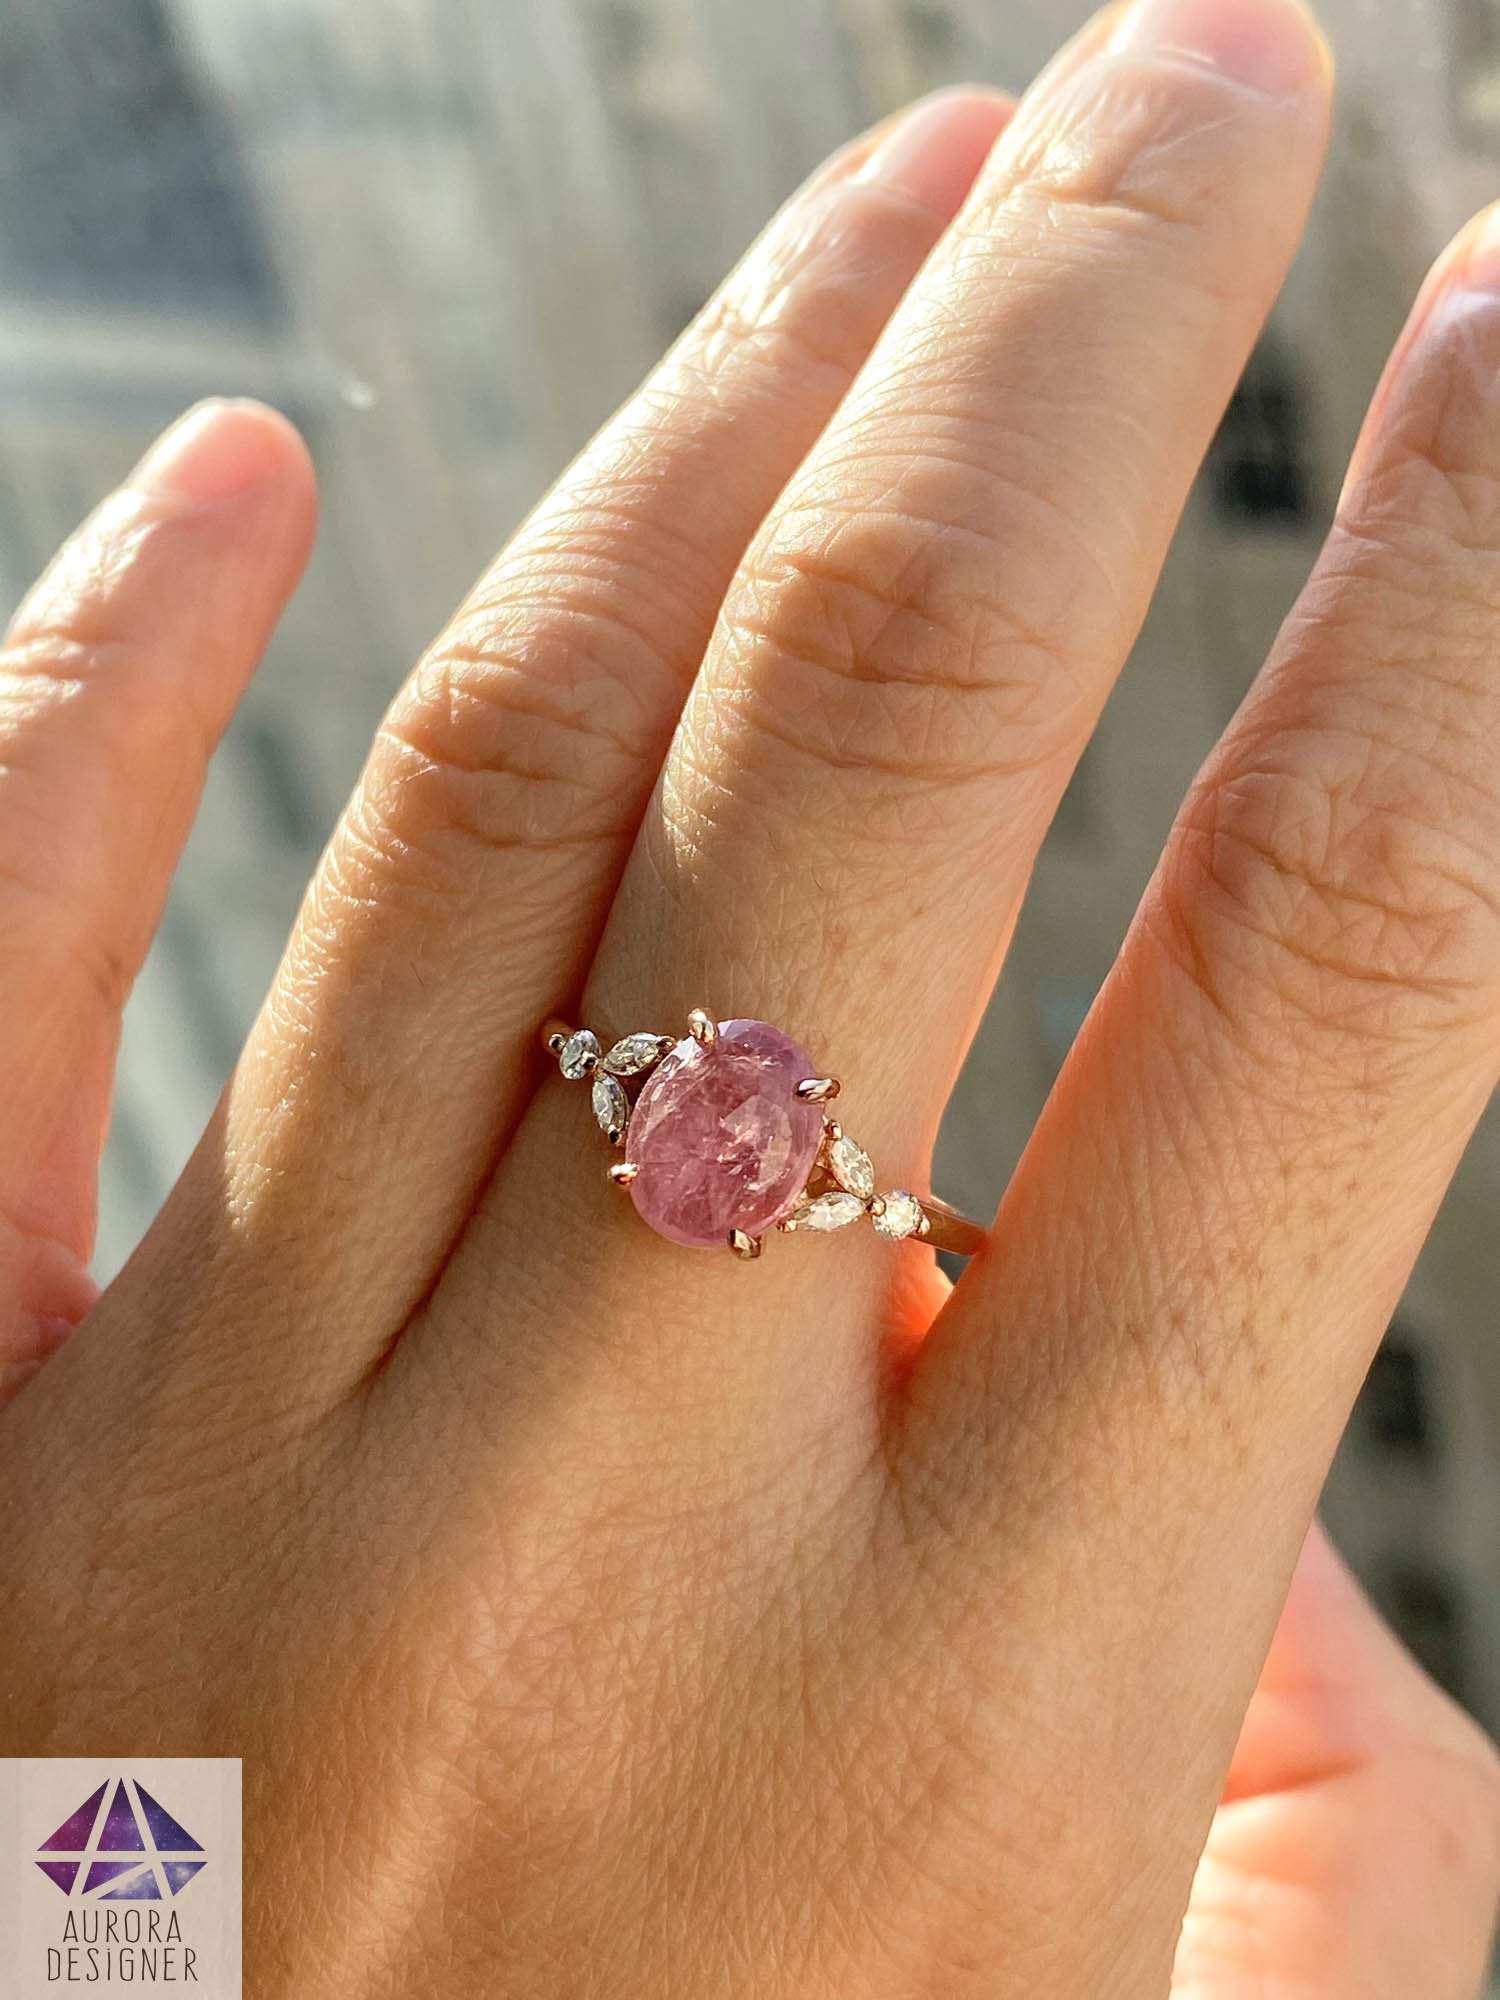 Pink Sapphire Ring Rose Gold, Sapphire Engagement Ring, Rose Gold Engagement Ring, Oval Cut Diamond Sapphire Ring with 2ct Sapphire